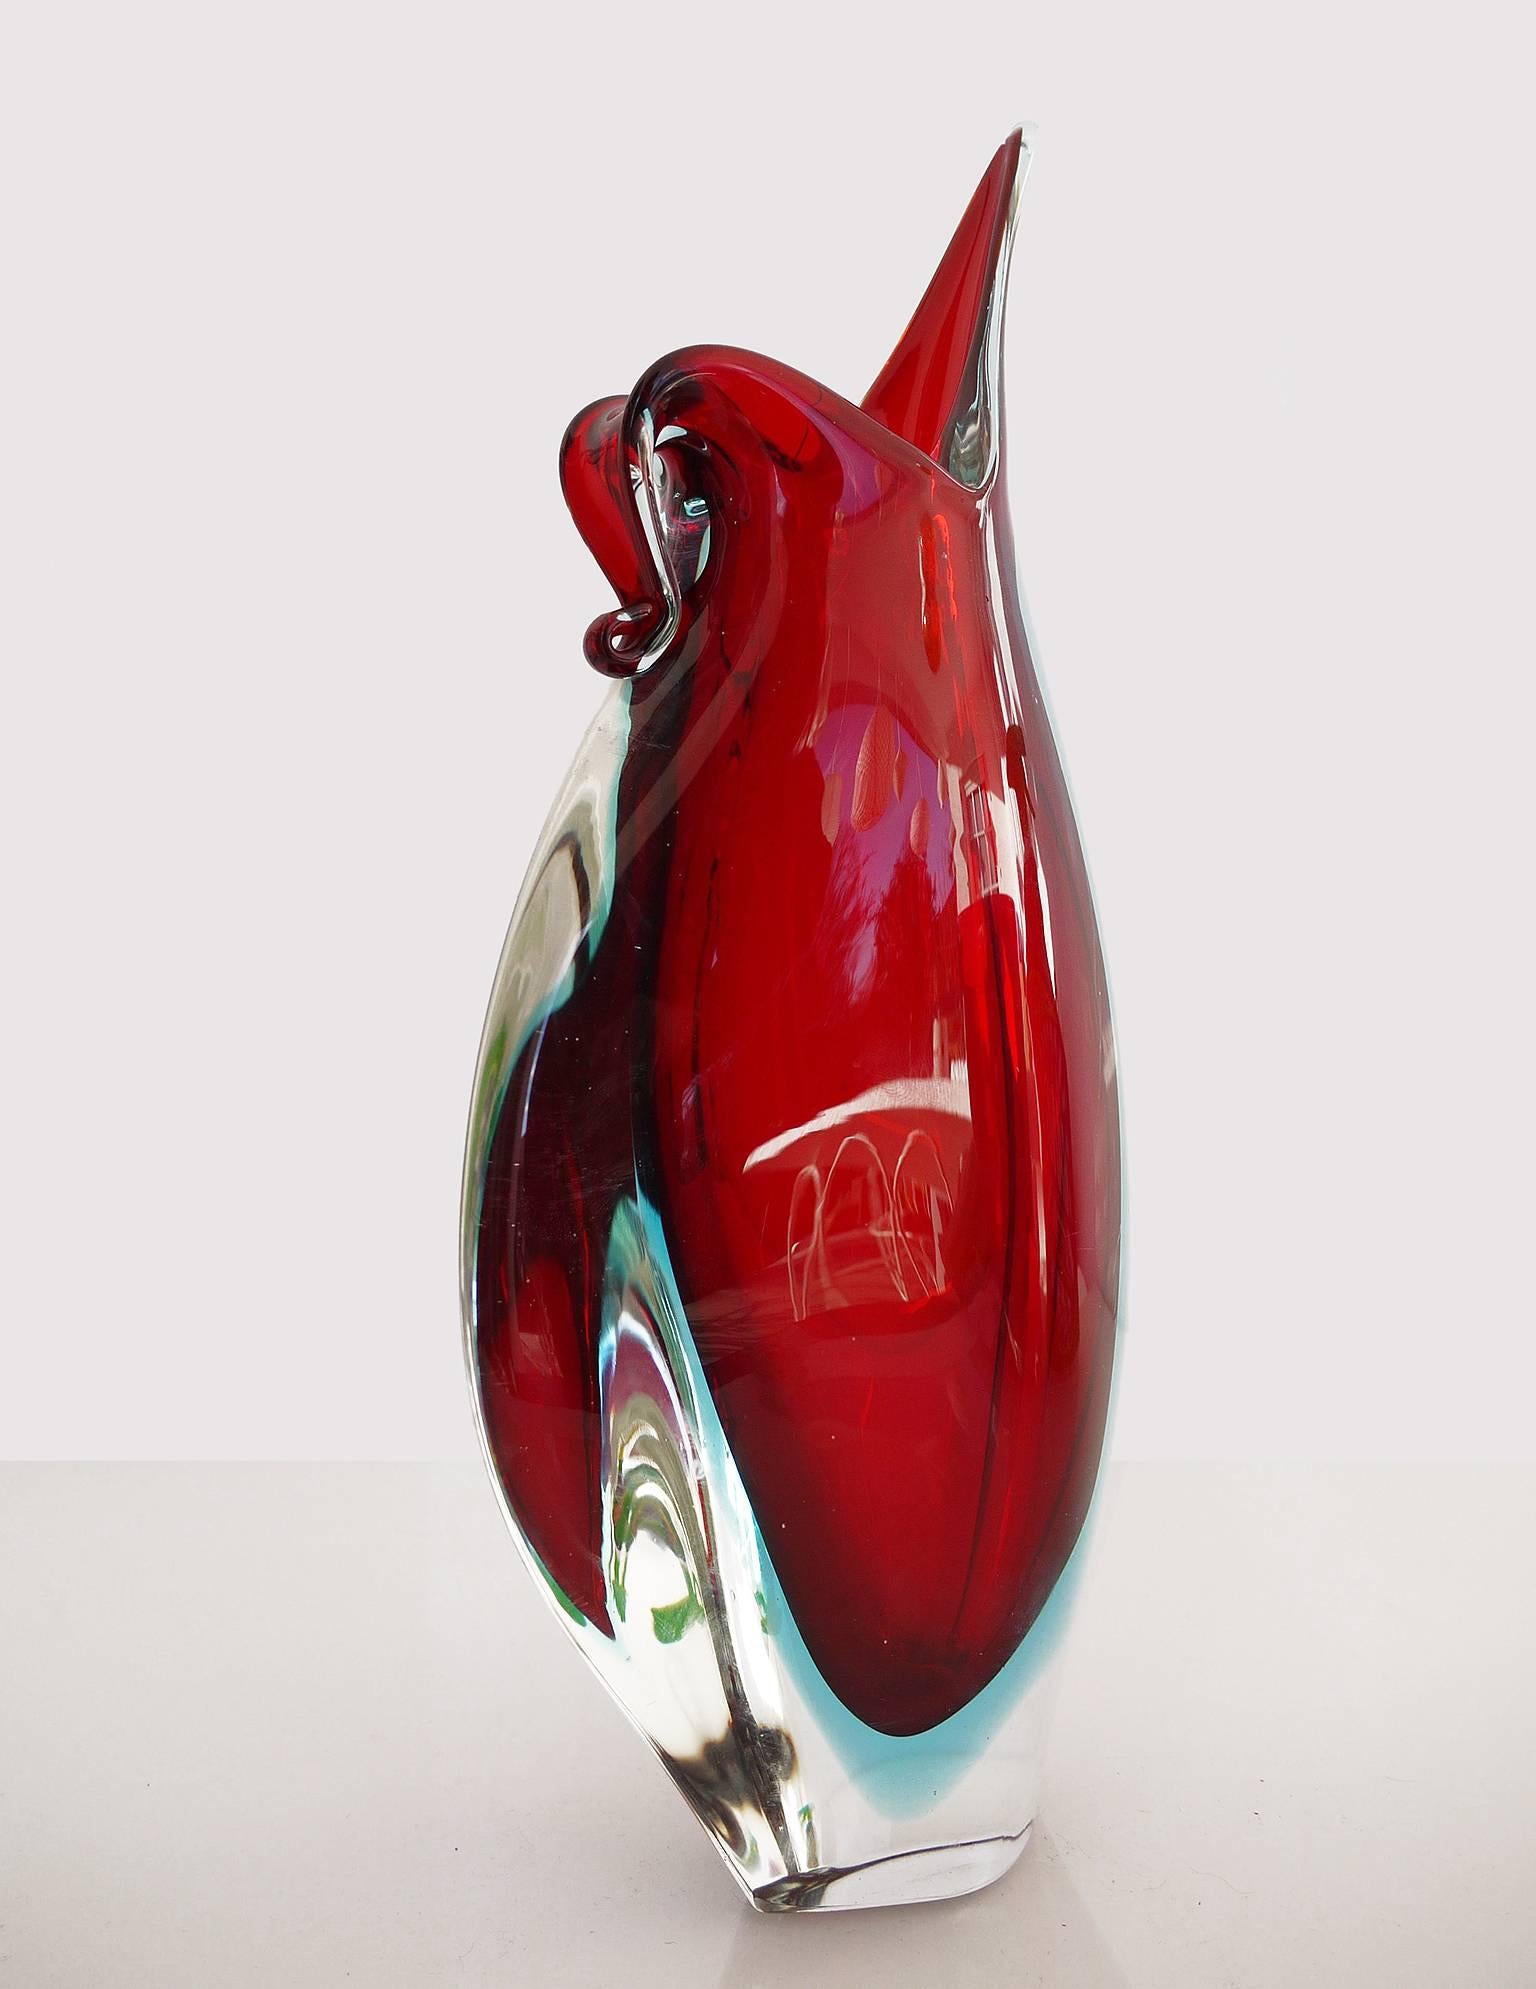 Large and heavy handblown sommerso Murano glass vase by Flavio Poli. Weight: 2484 g/ 5.48 lb.